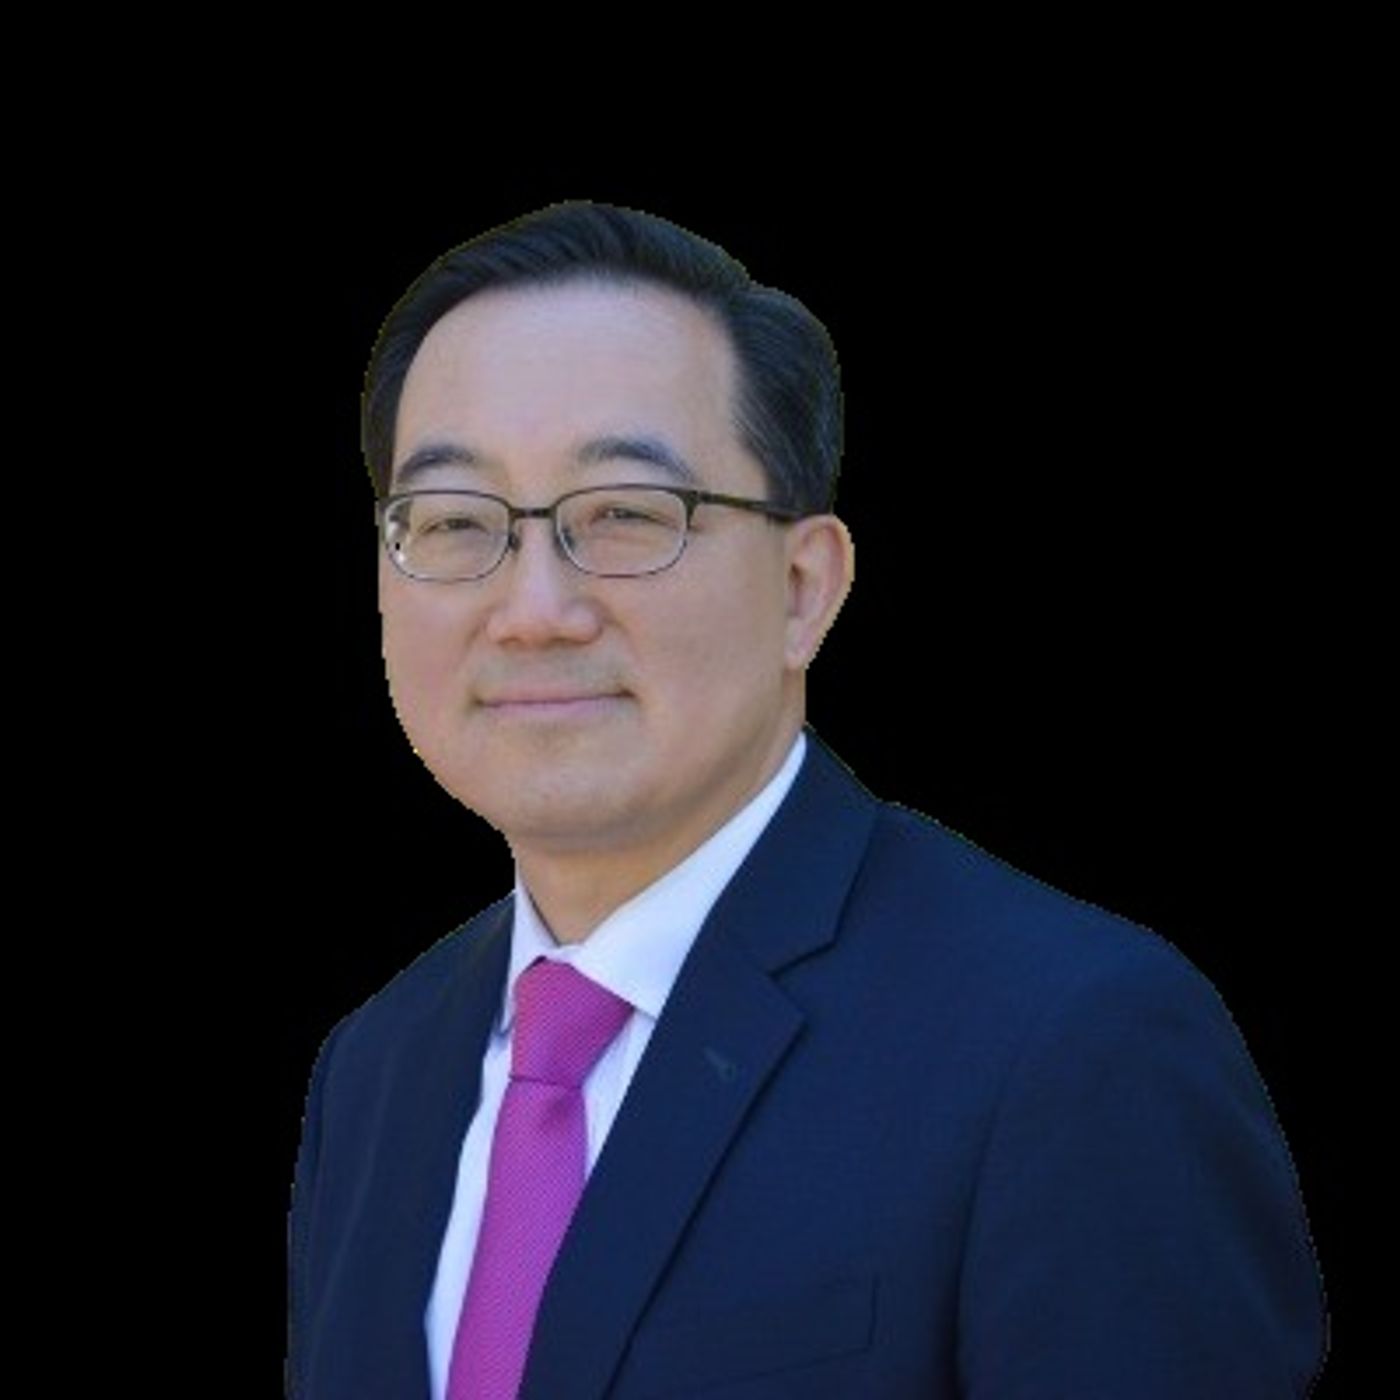 Interview With Stephen Ng, CLU, ChFC, CEP Founder of Stephen Ng Financial Group-Discussing IRA Rescue to Leverage Retirement Wealth